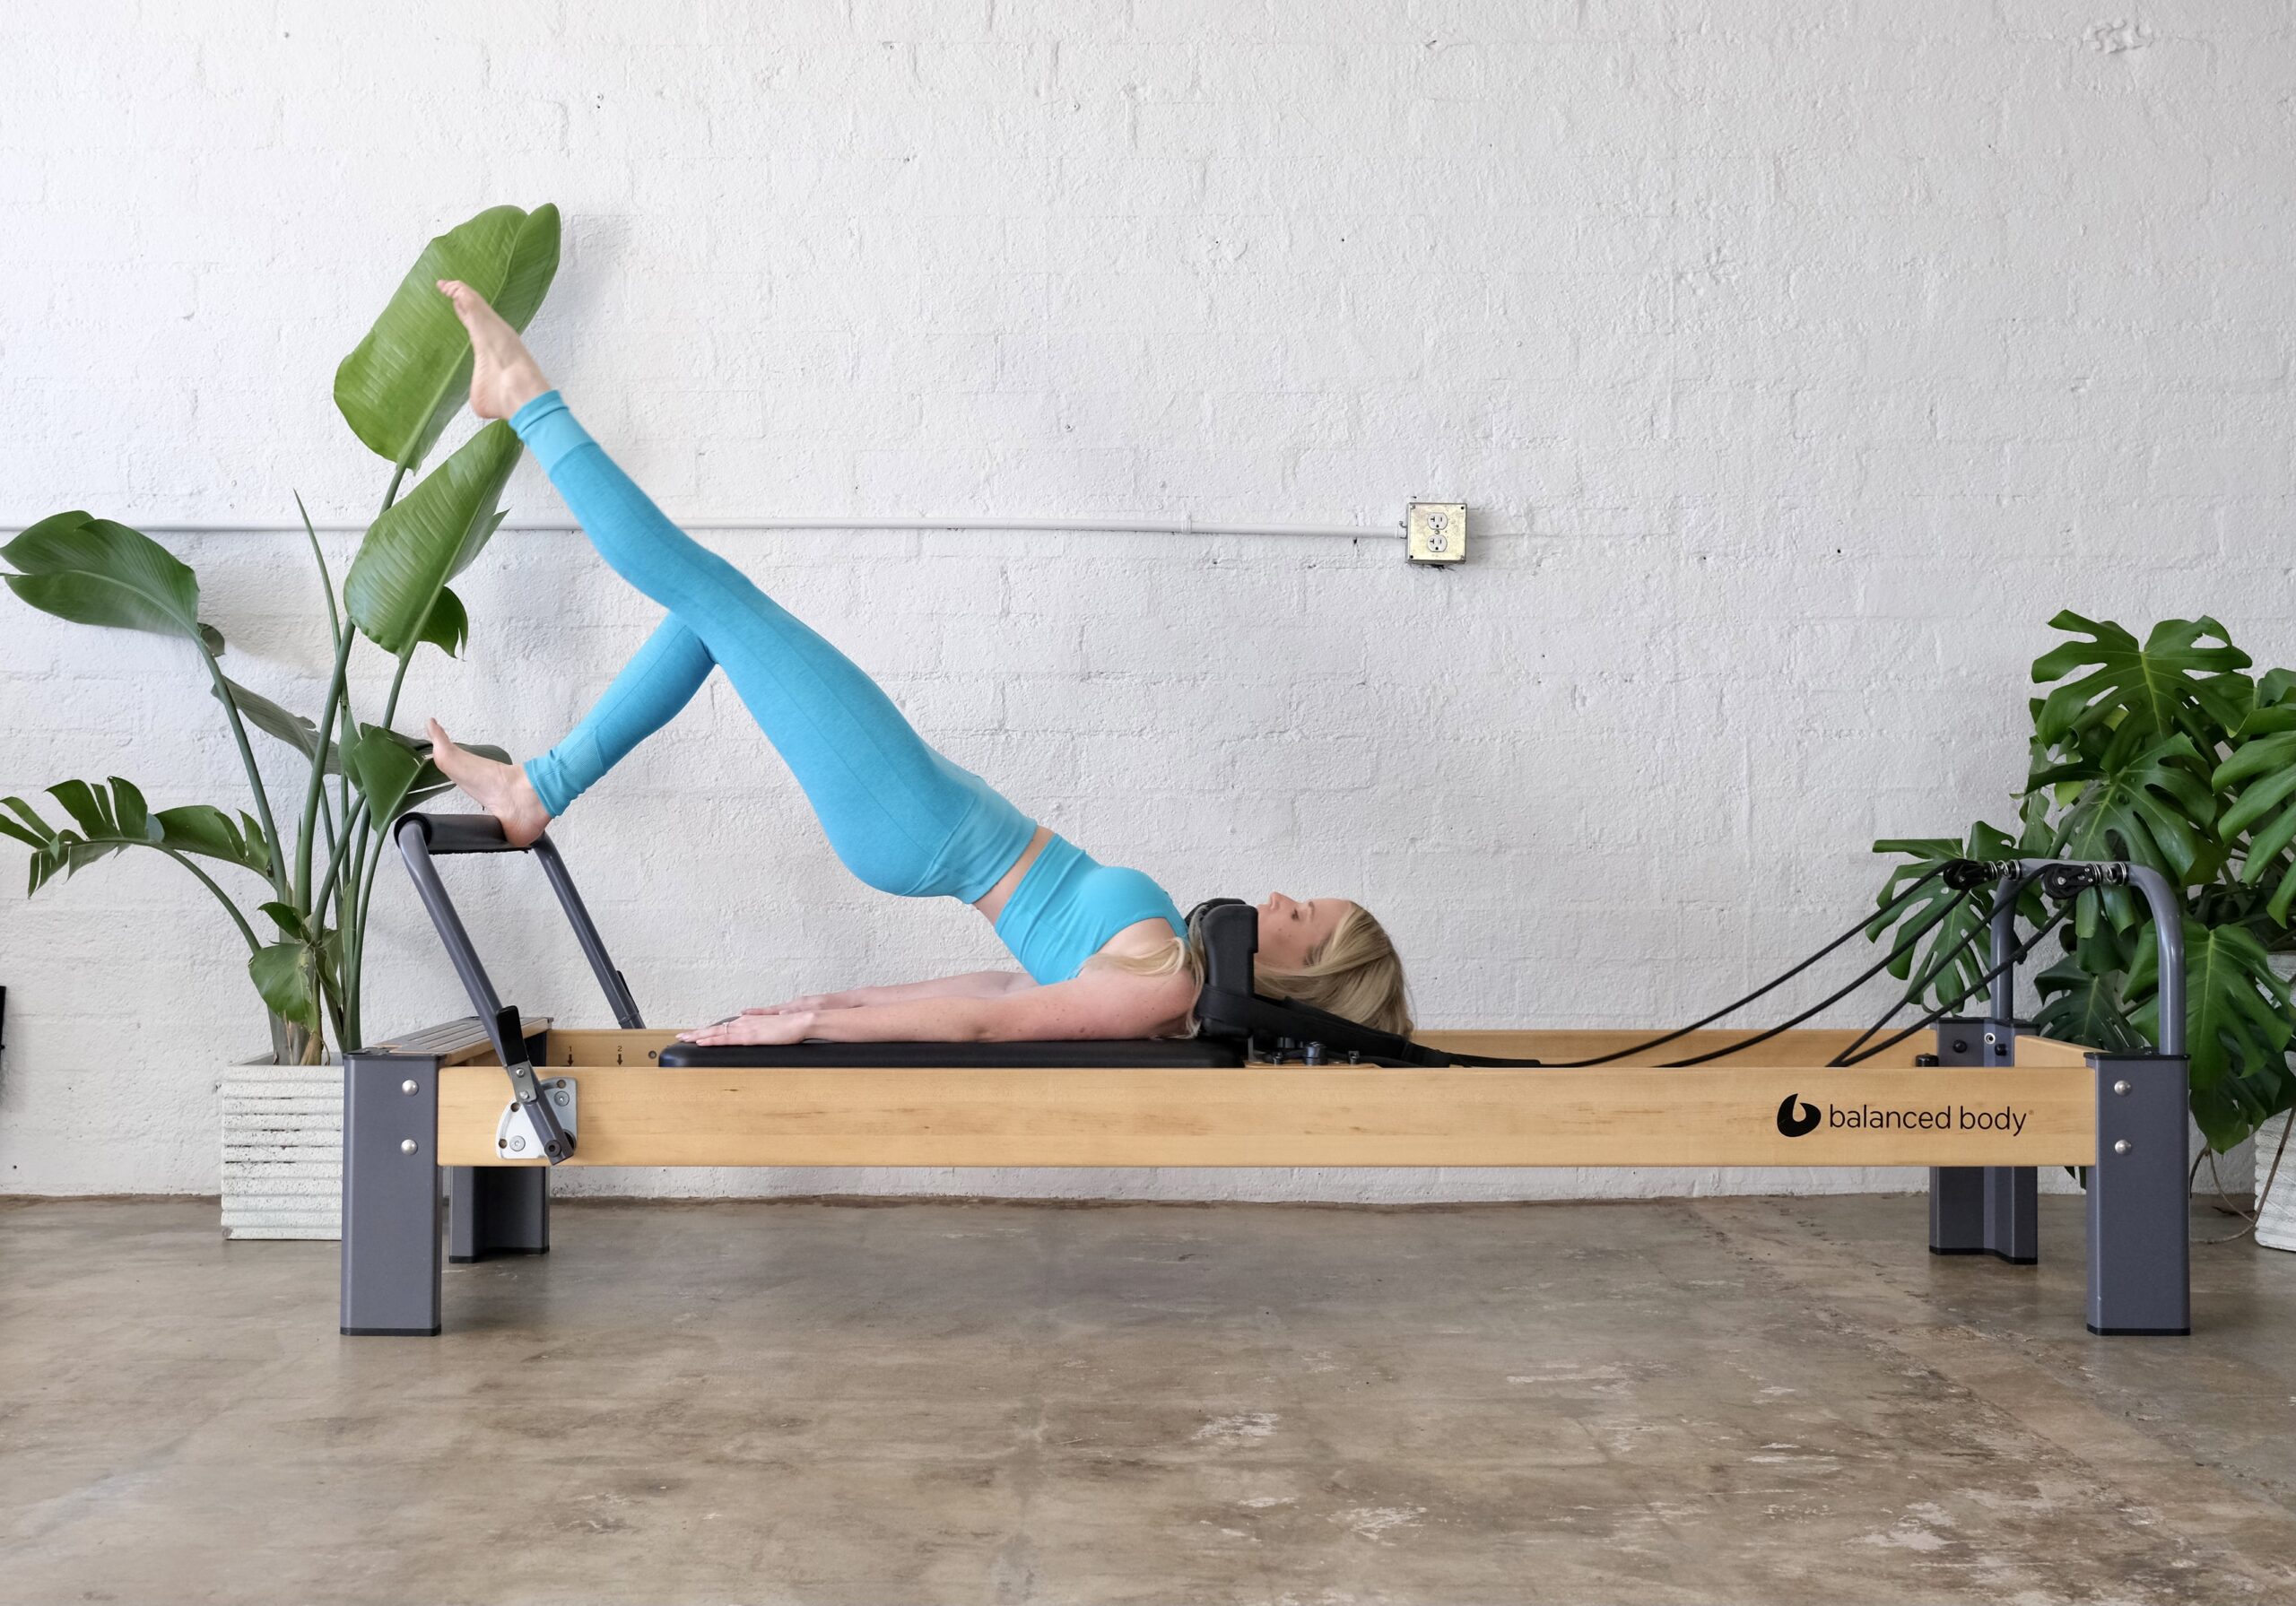 Pilates fit is a new term that has been coined in the world of fitness